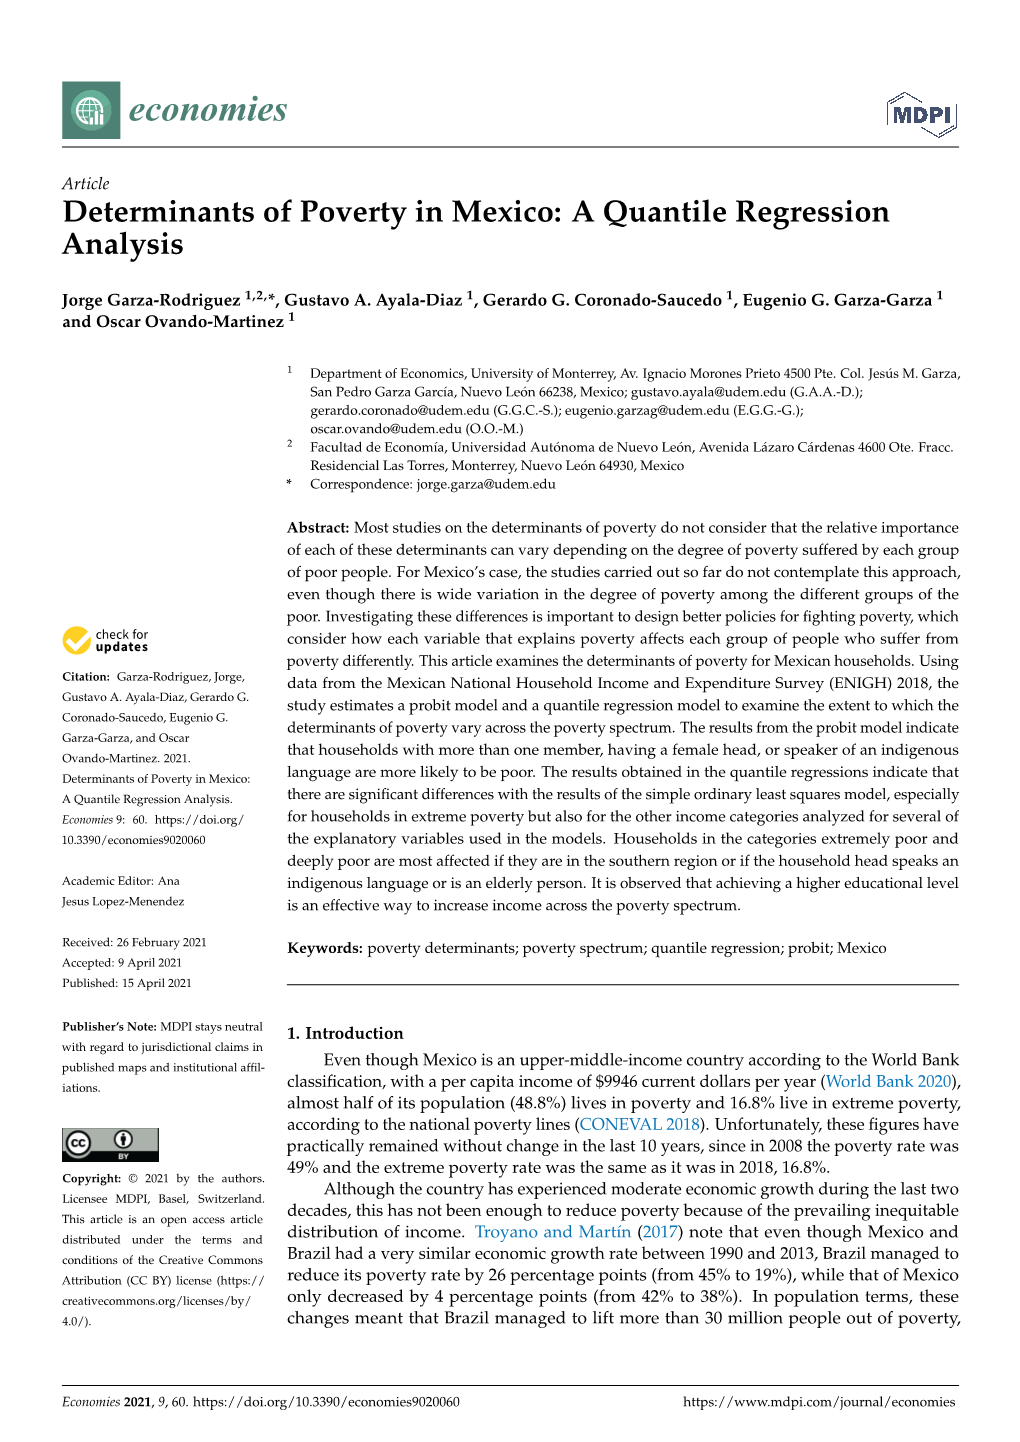 Determinants of Poverty in Mexico: a Quantile Regression Analysis